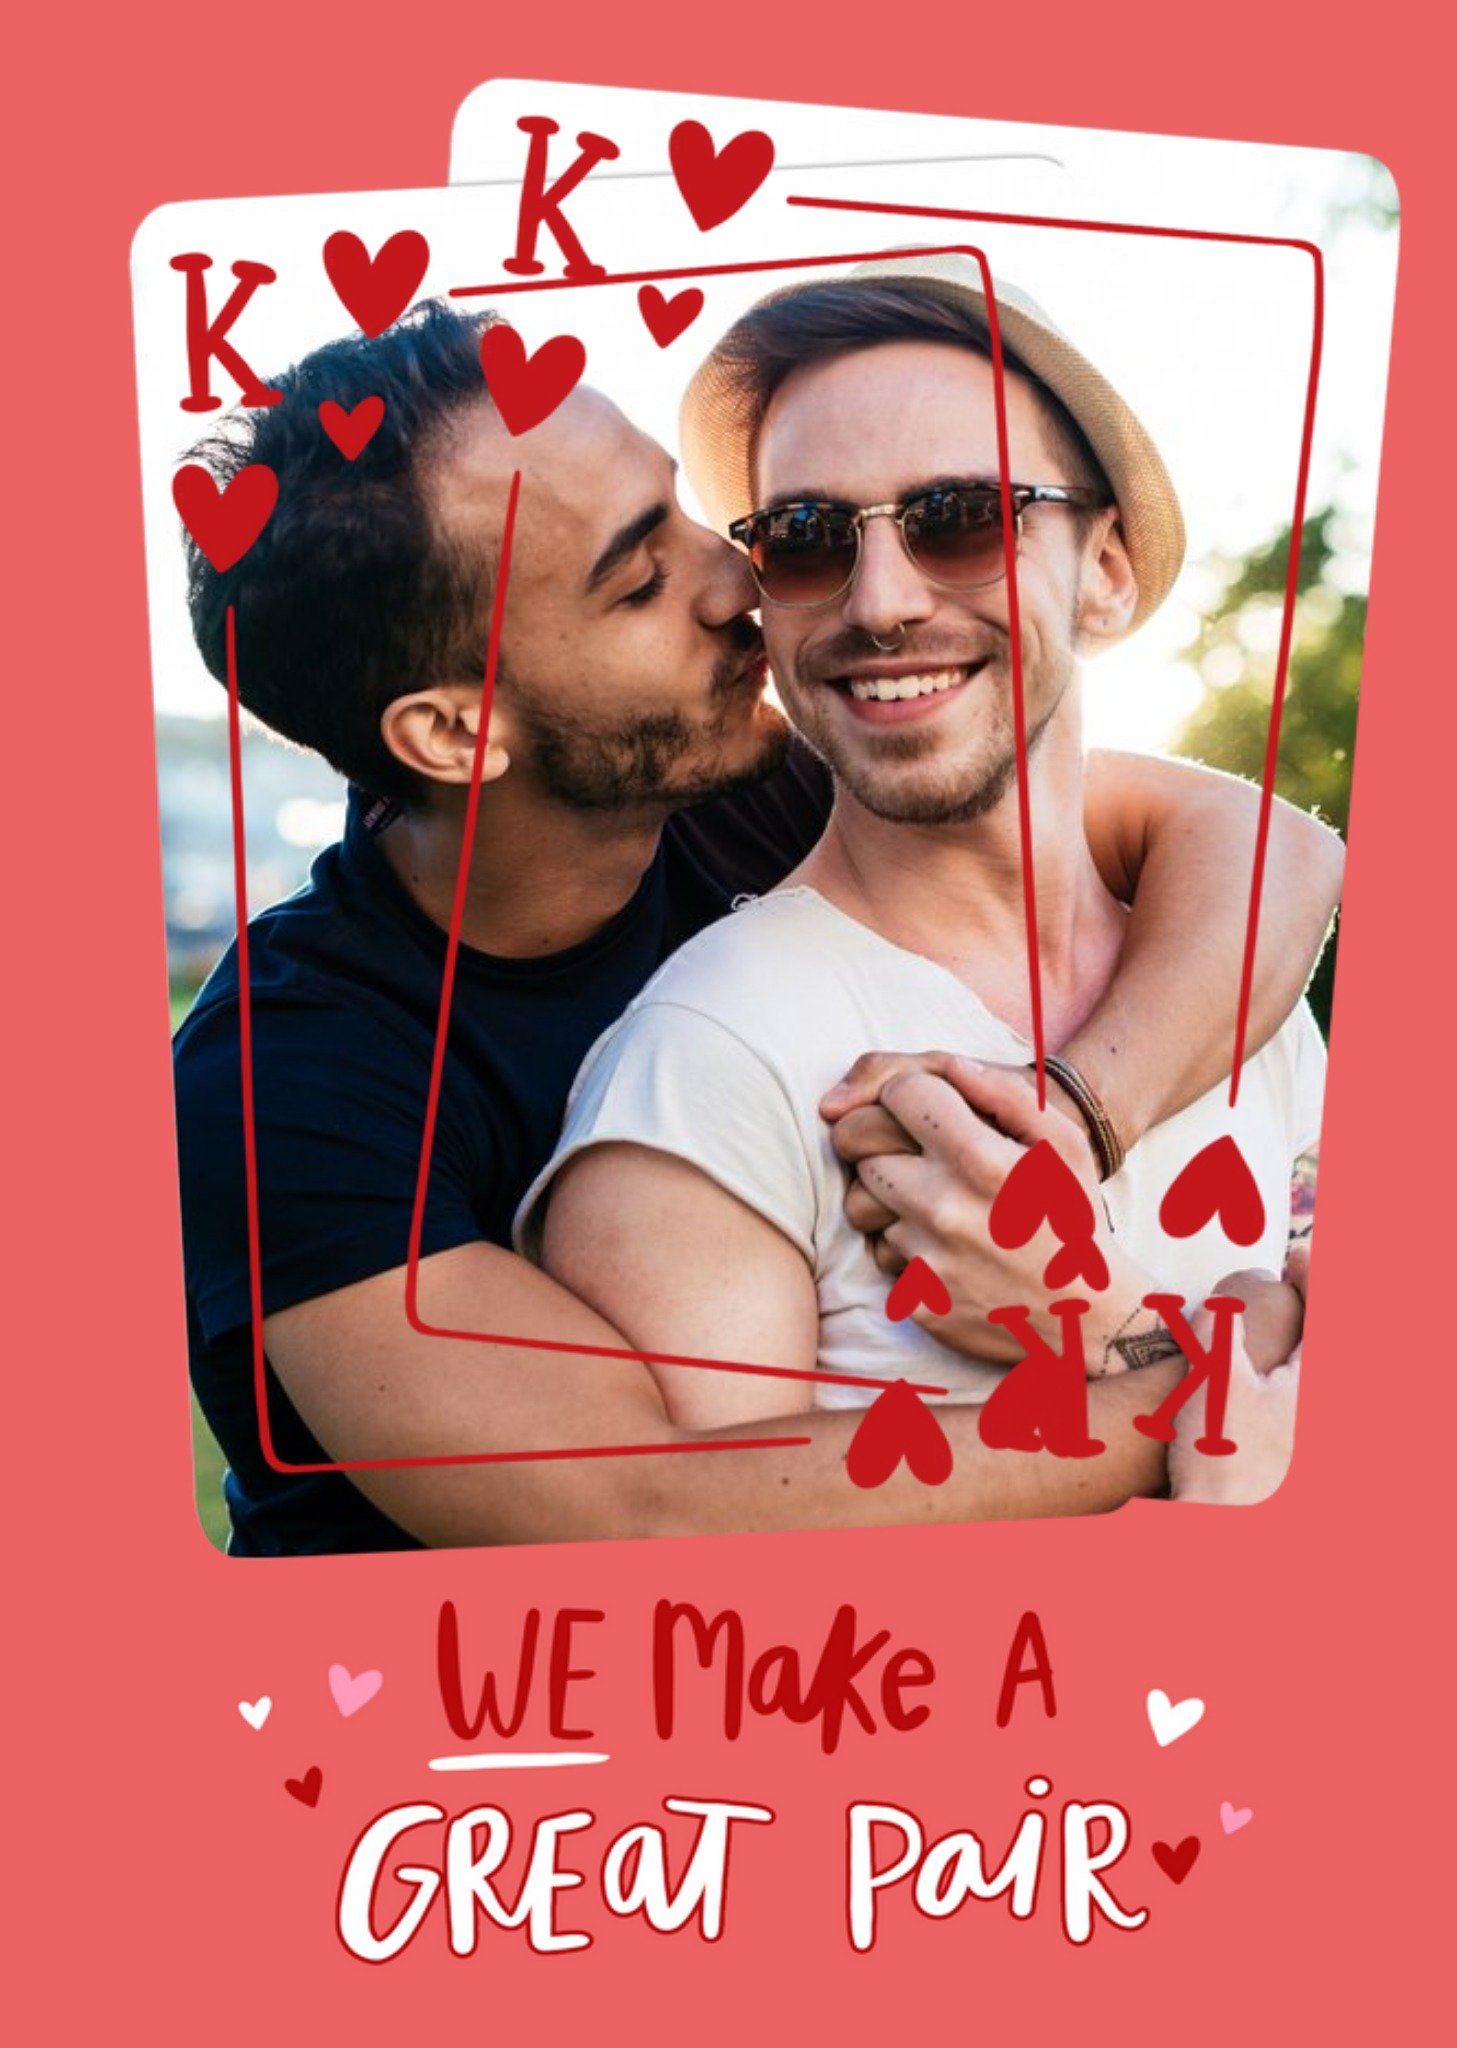 Moonpig We Make A Great Pair Red Playing Cards Photo Upload Valentines Card, Large